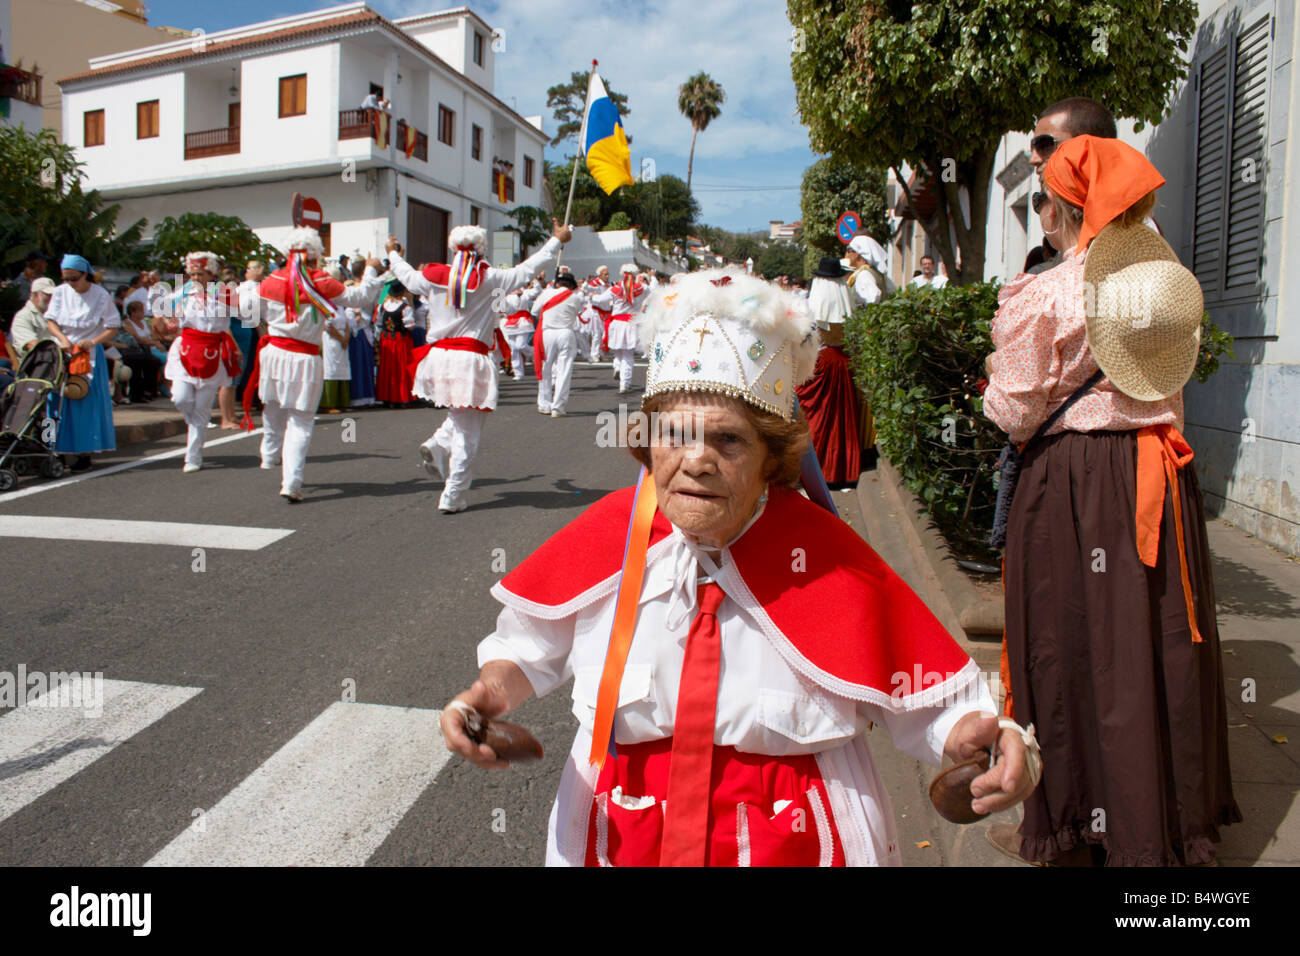 Los Bailarines (dancers) from El Hierro in traditional red and white costume dancing at local fiesta Stock Photo